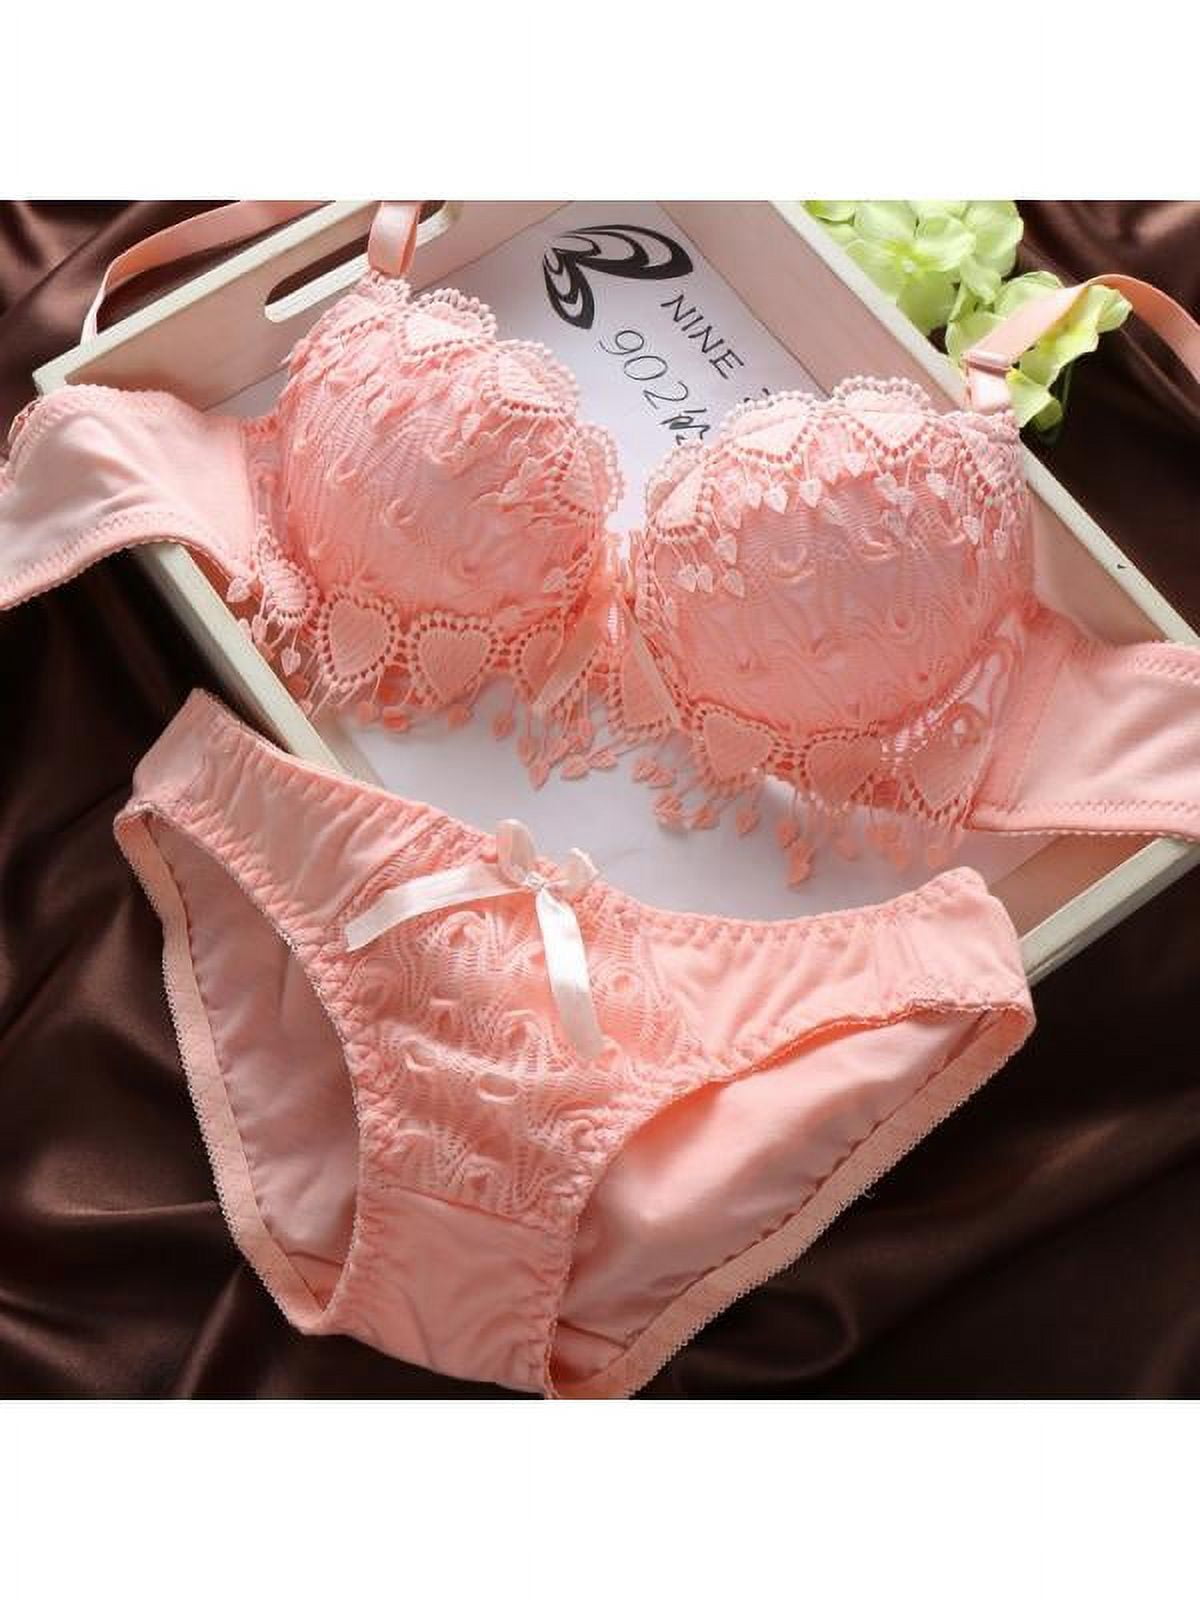 Womens Sexy Foral Lace Push Up Bra Sets Extreme Padded